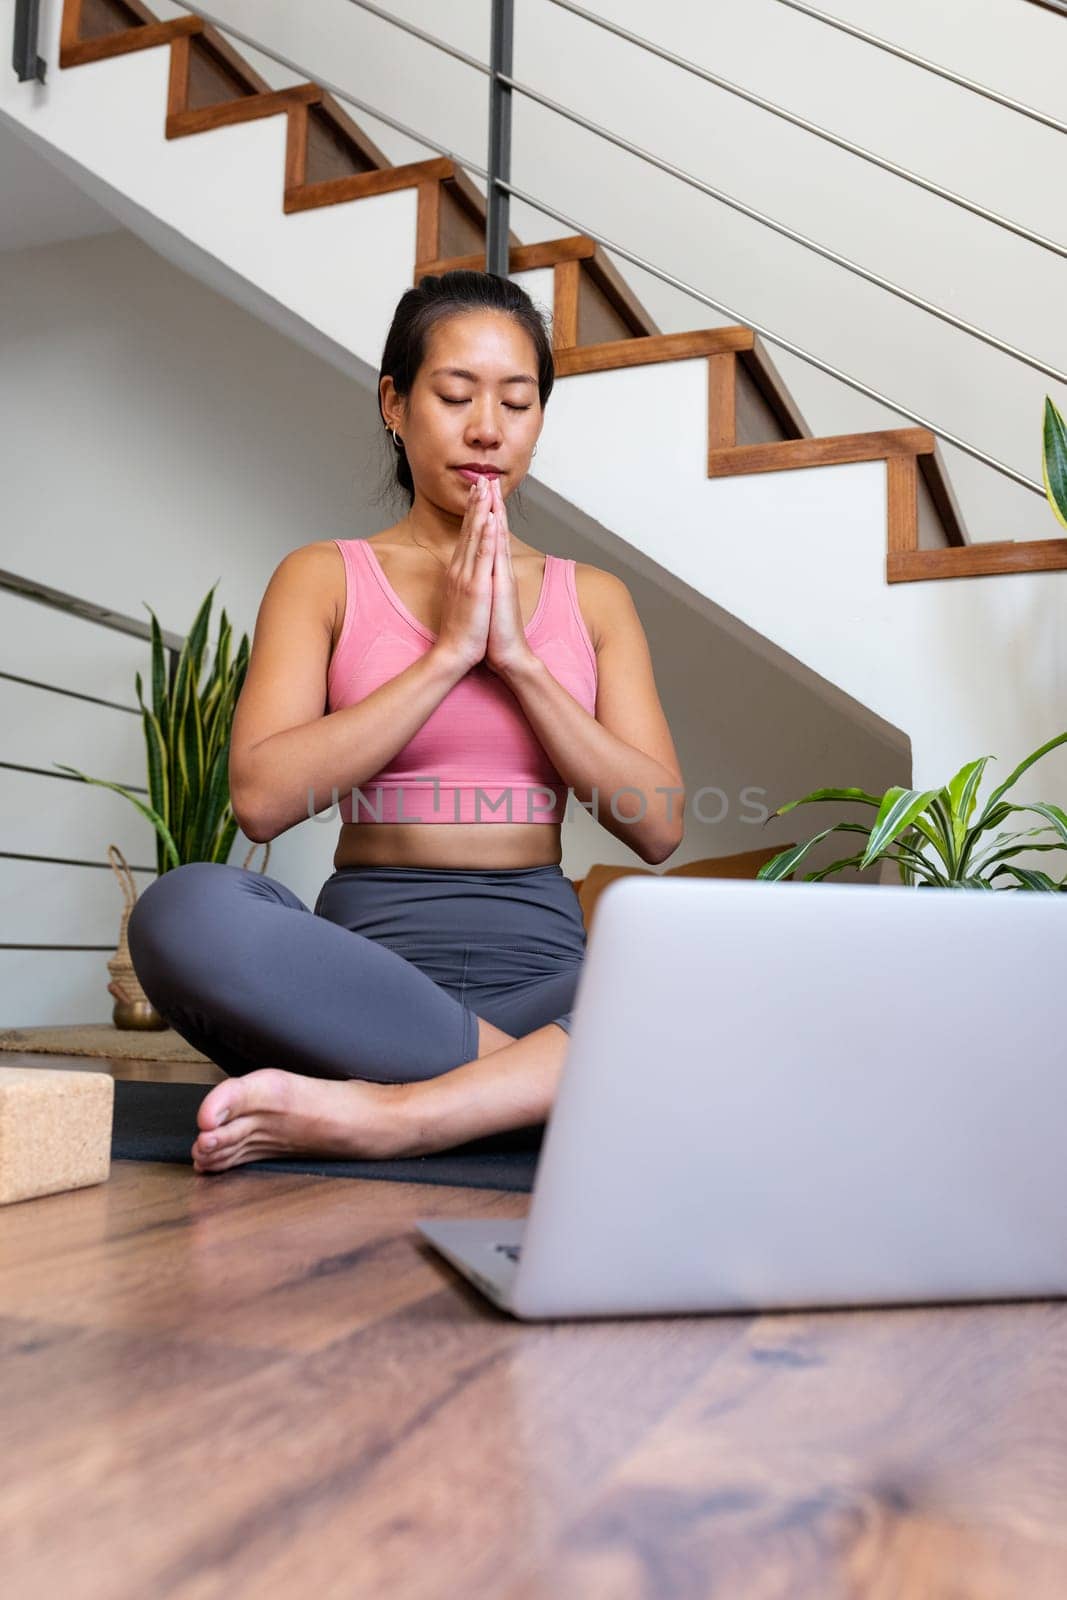 Vertical portrait of young Asian woman doing online meditation with hands in prayer at home living room sitting on yoga mat using laptop. Spirituality concept.